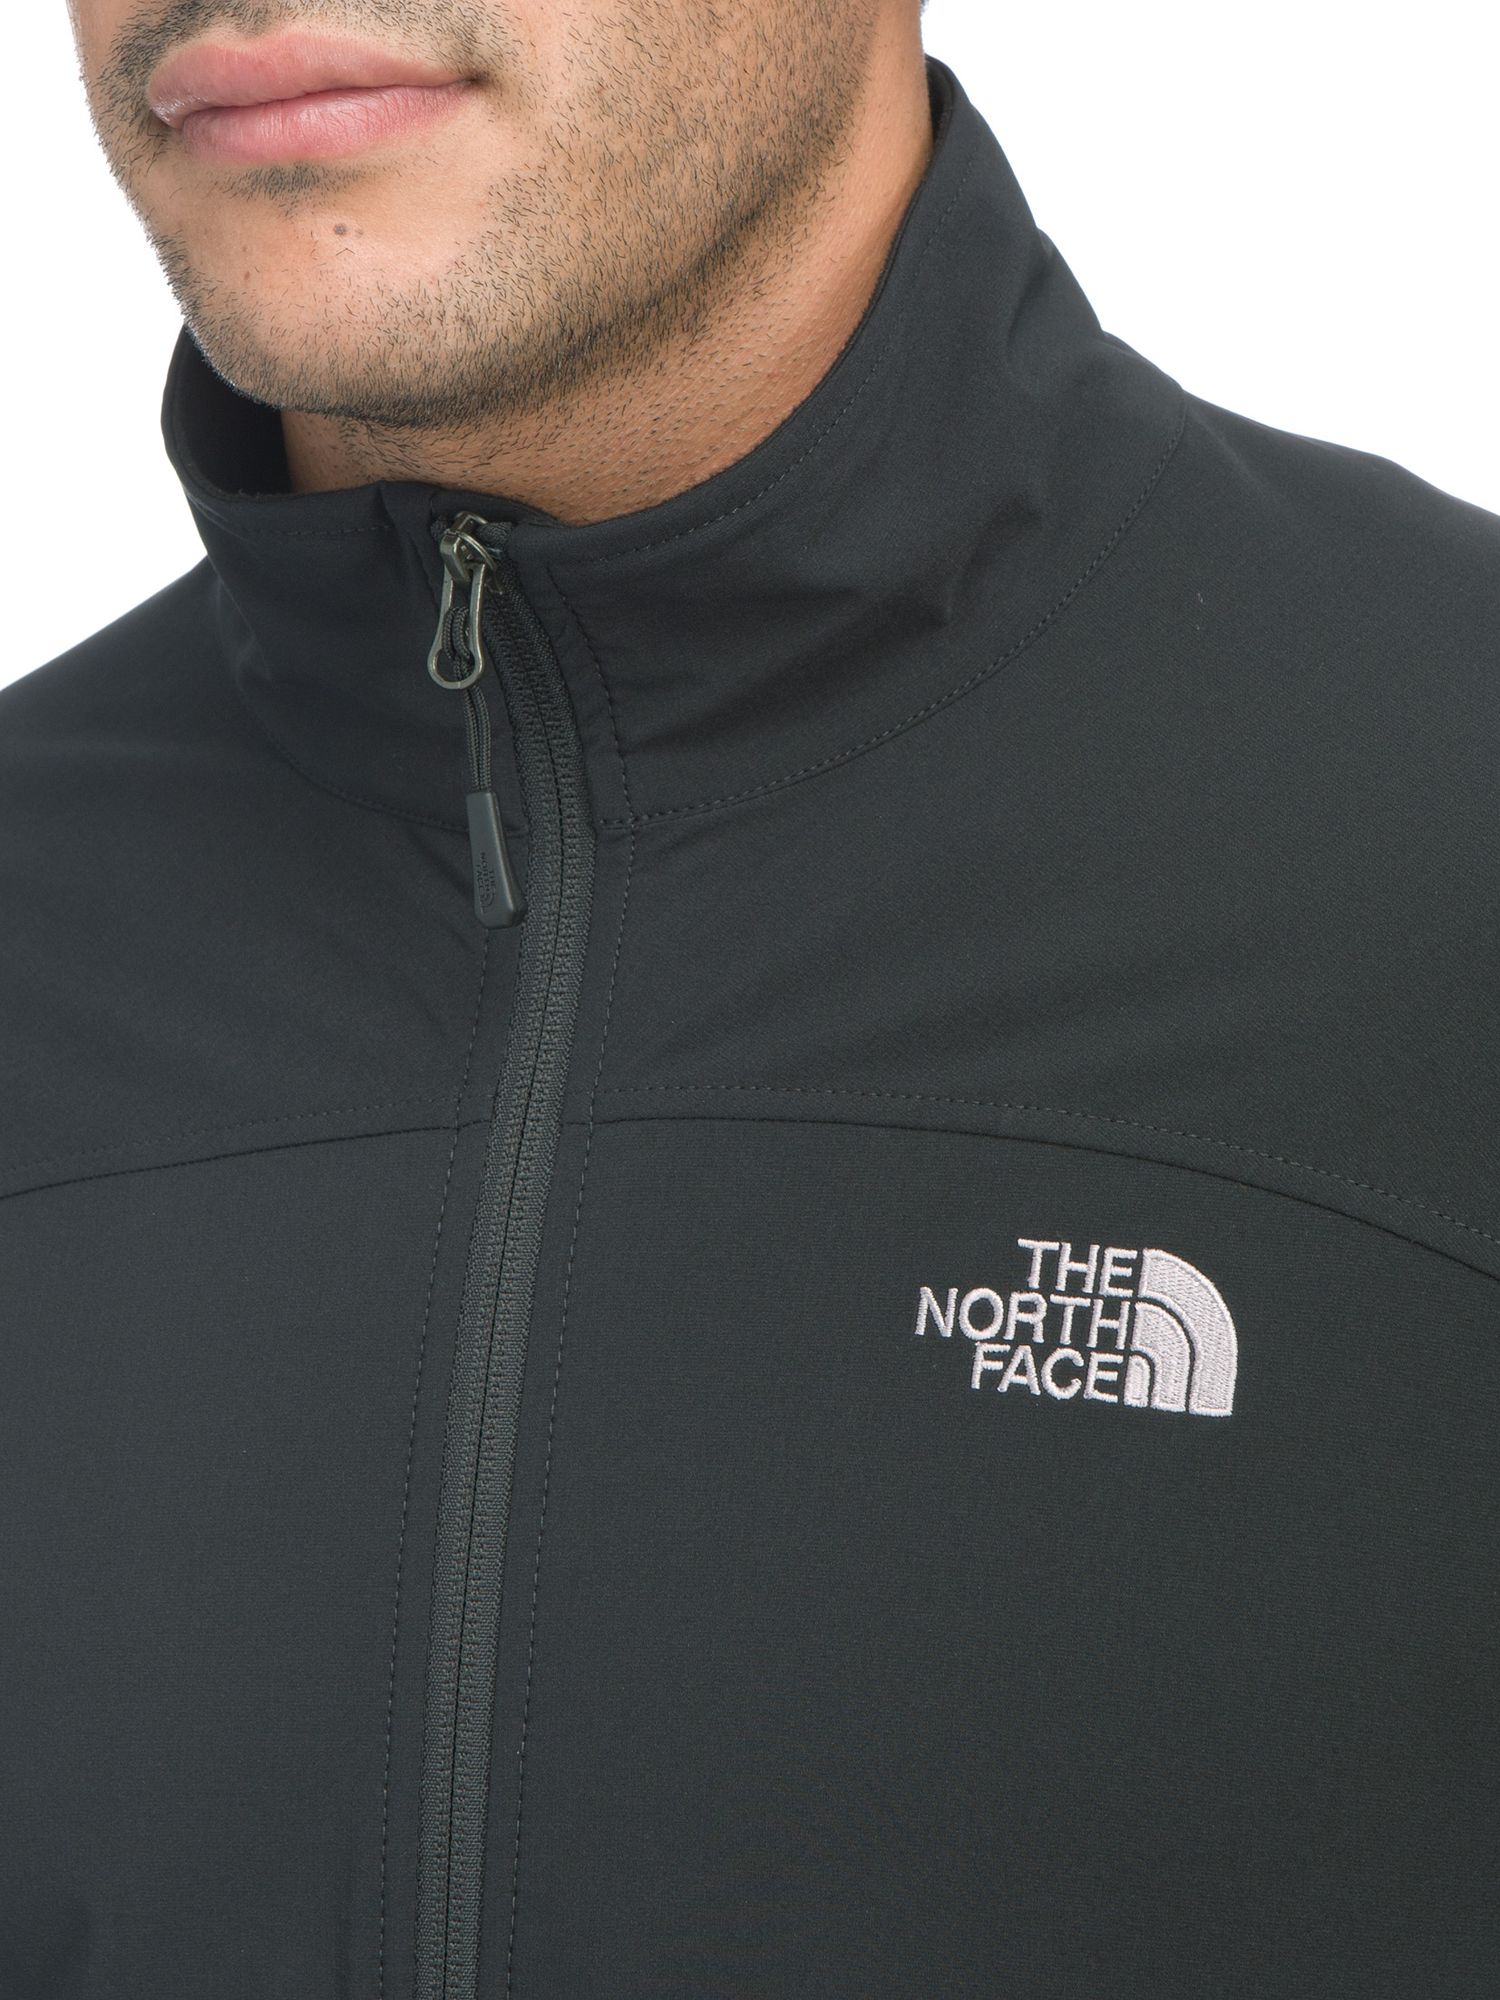 the north face ceresio jacket